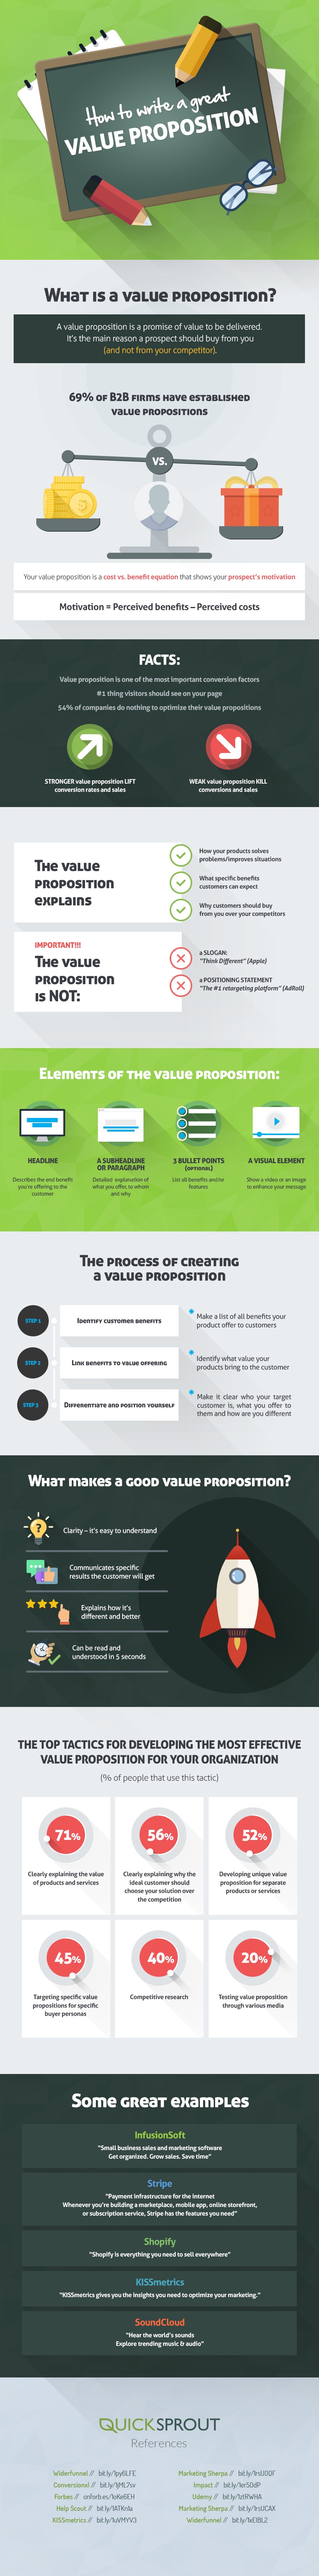 Value_Proposition_Infographic